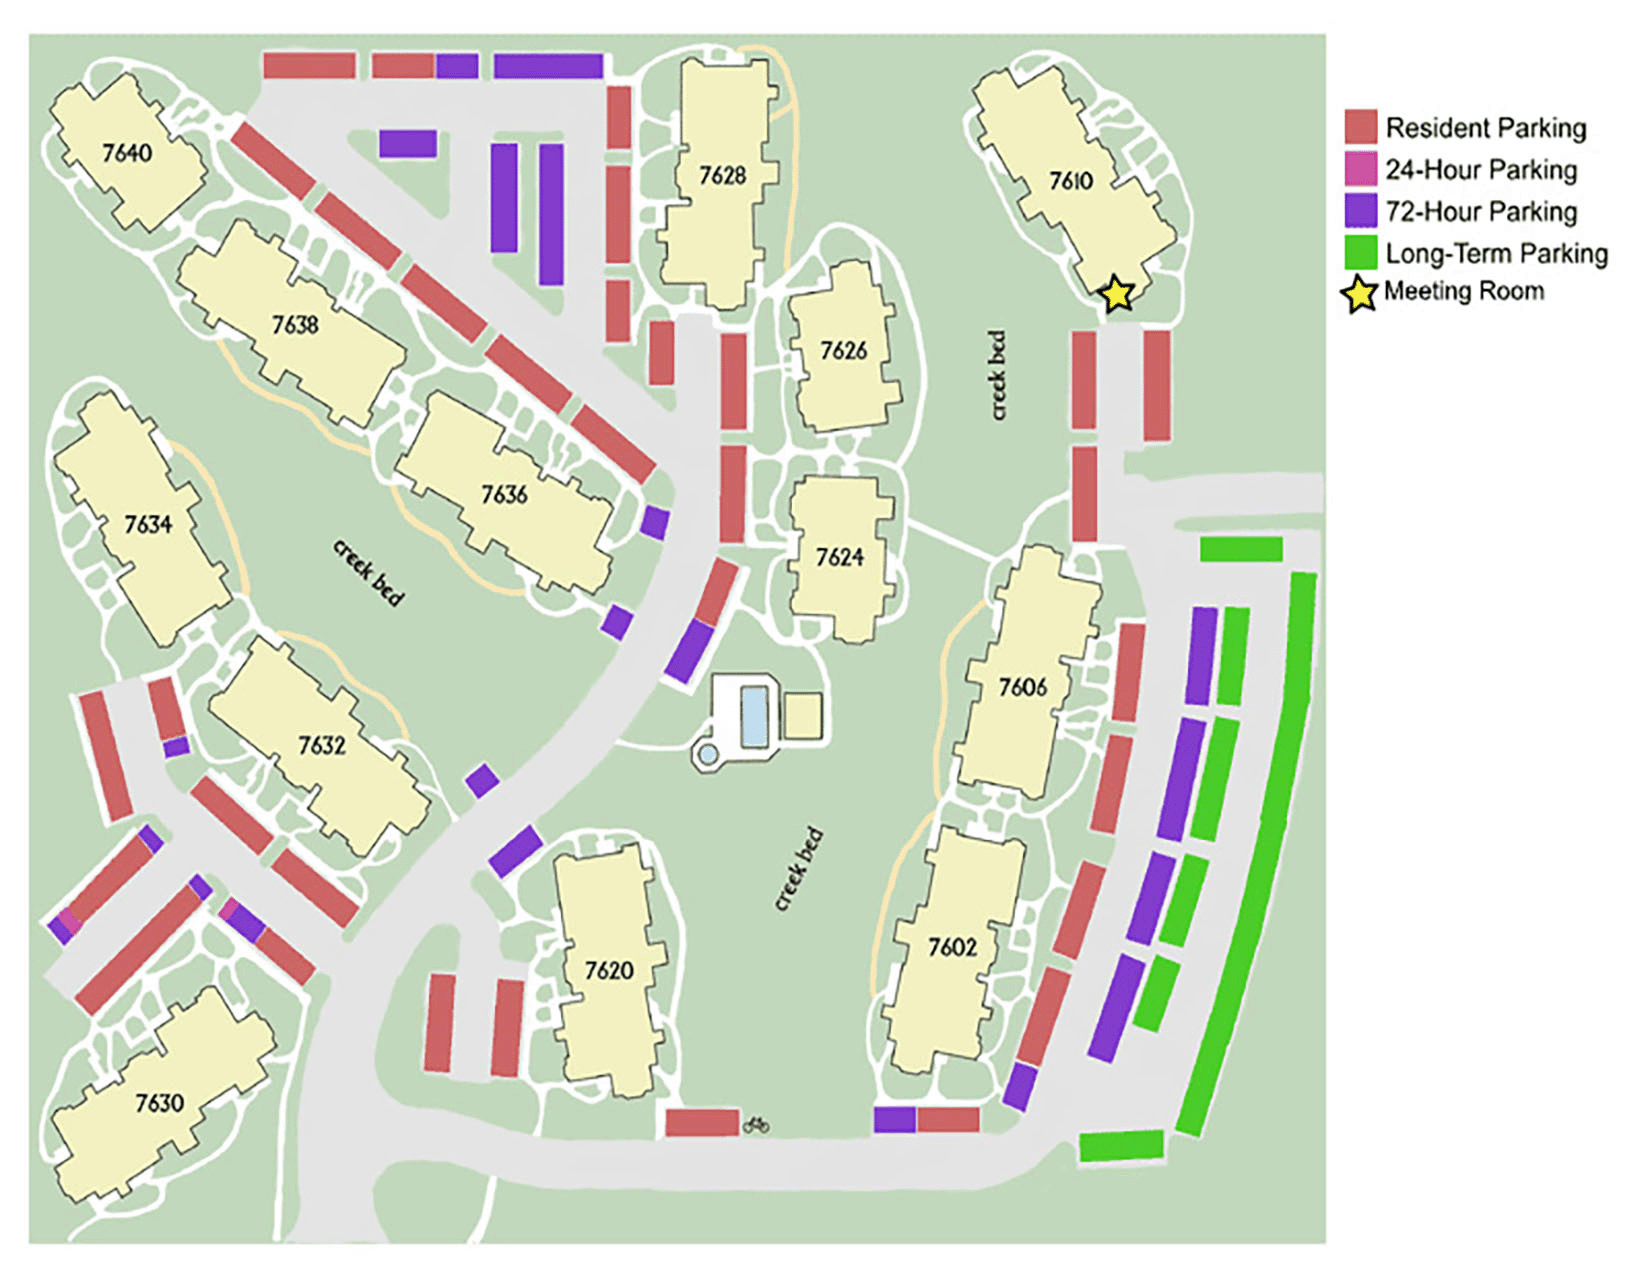 Parking Map of the Grove